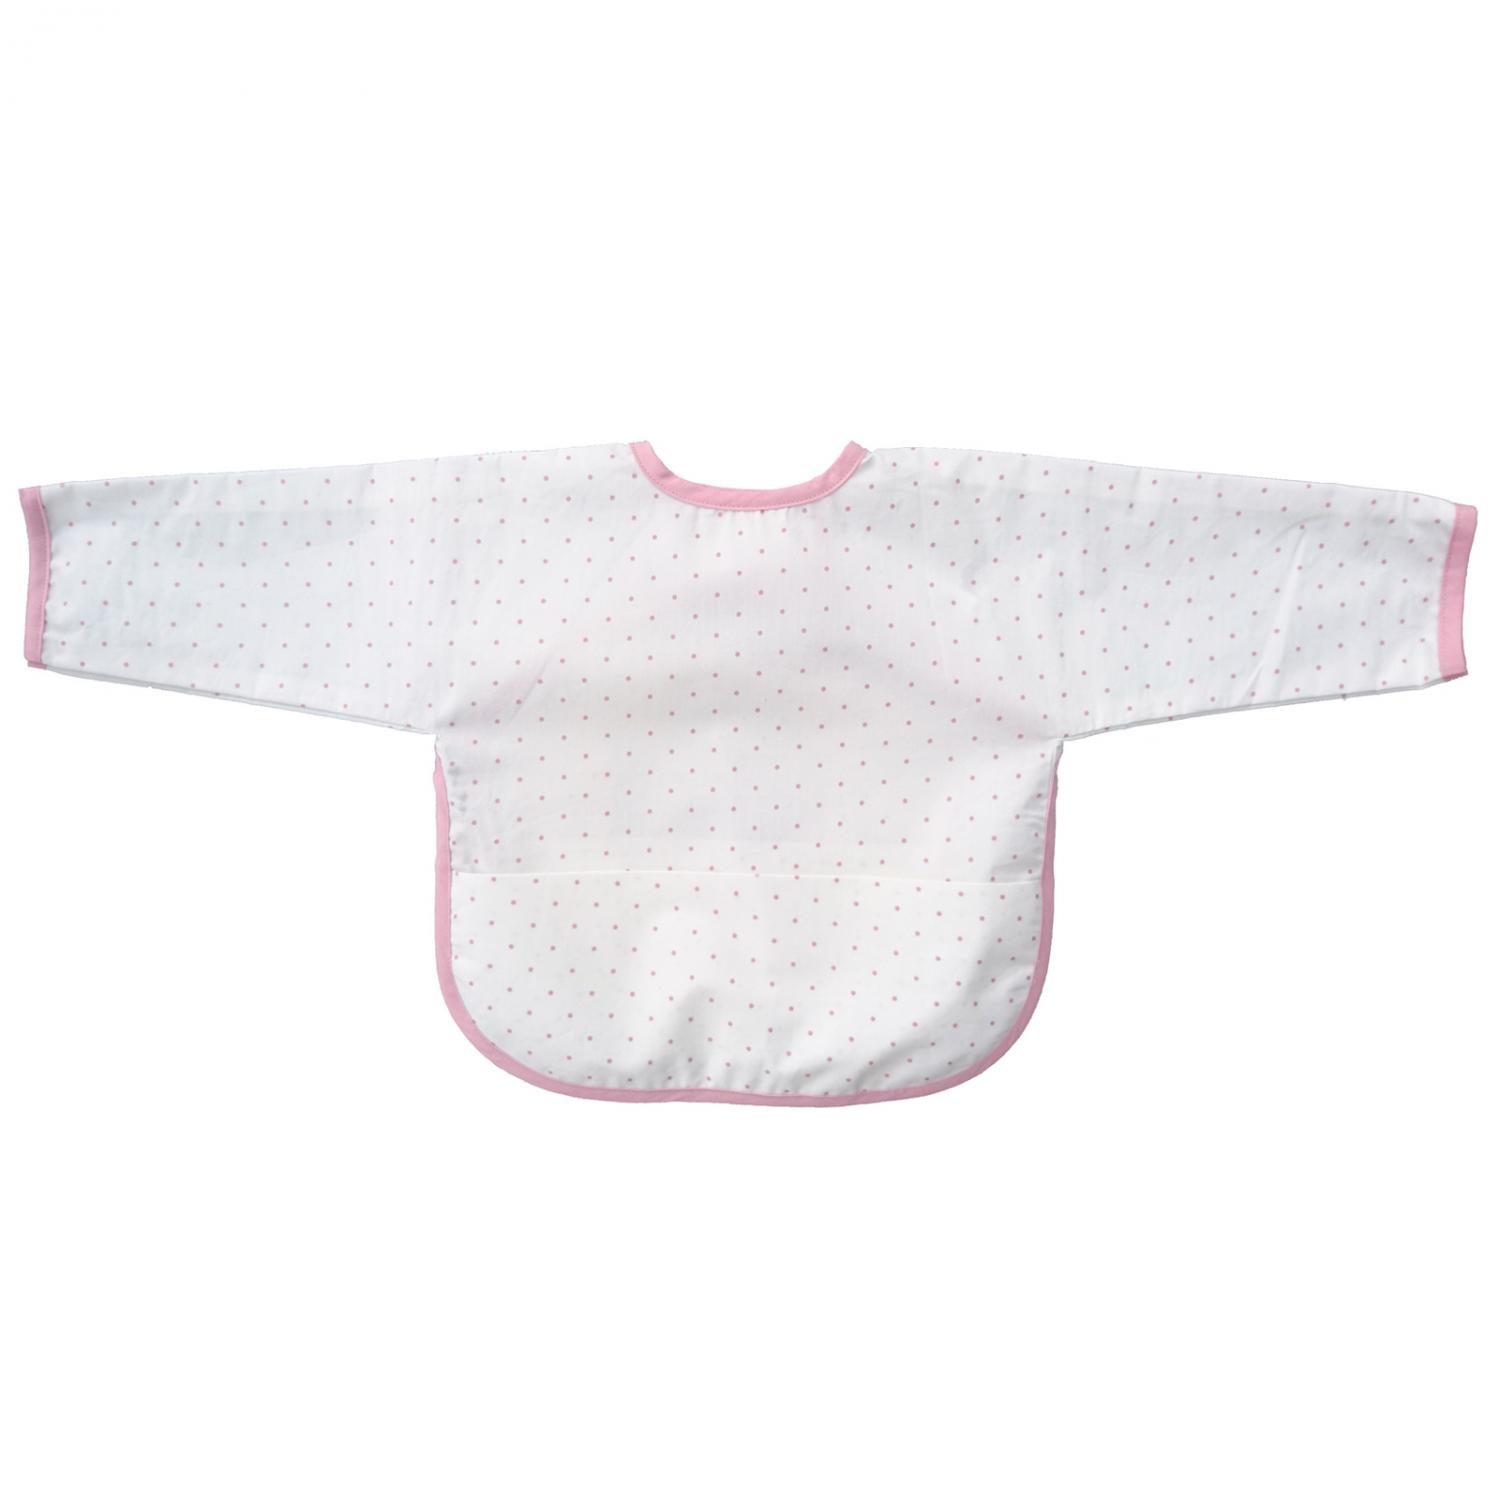 Bib with sleeves white/pink dotty